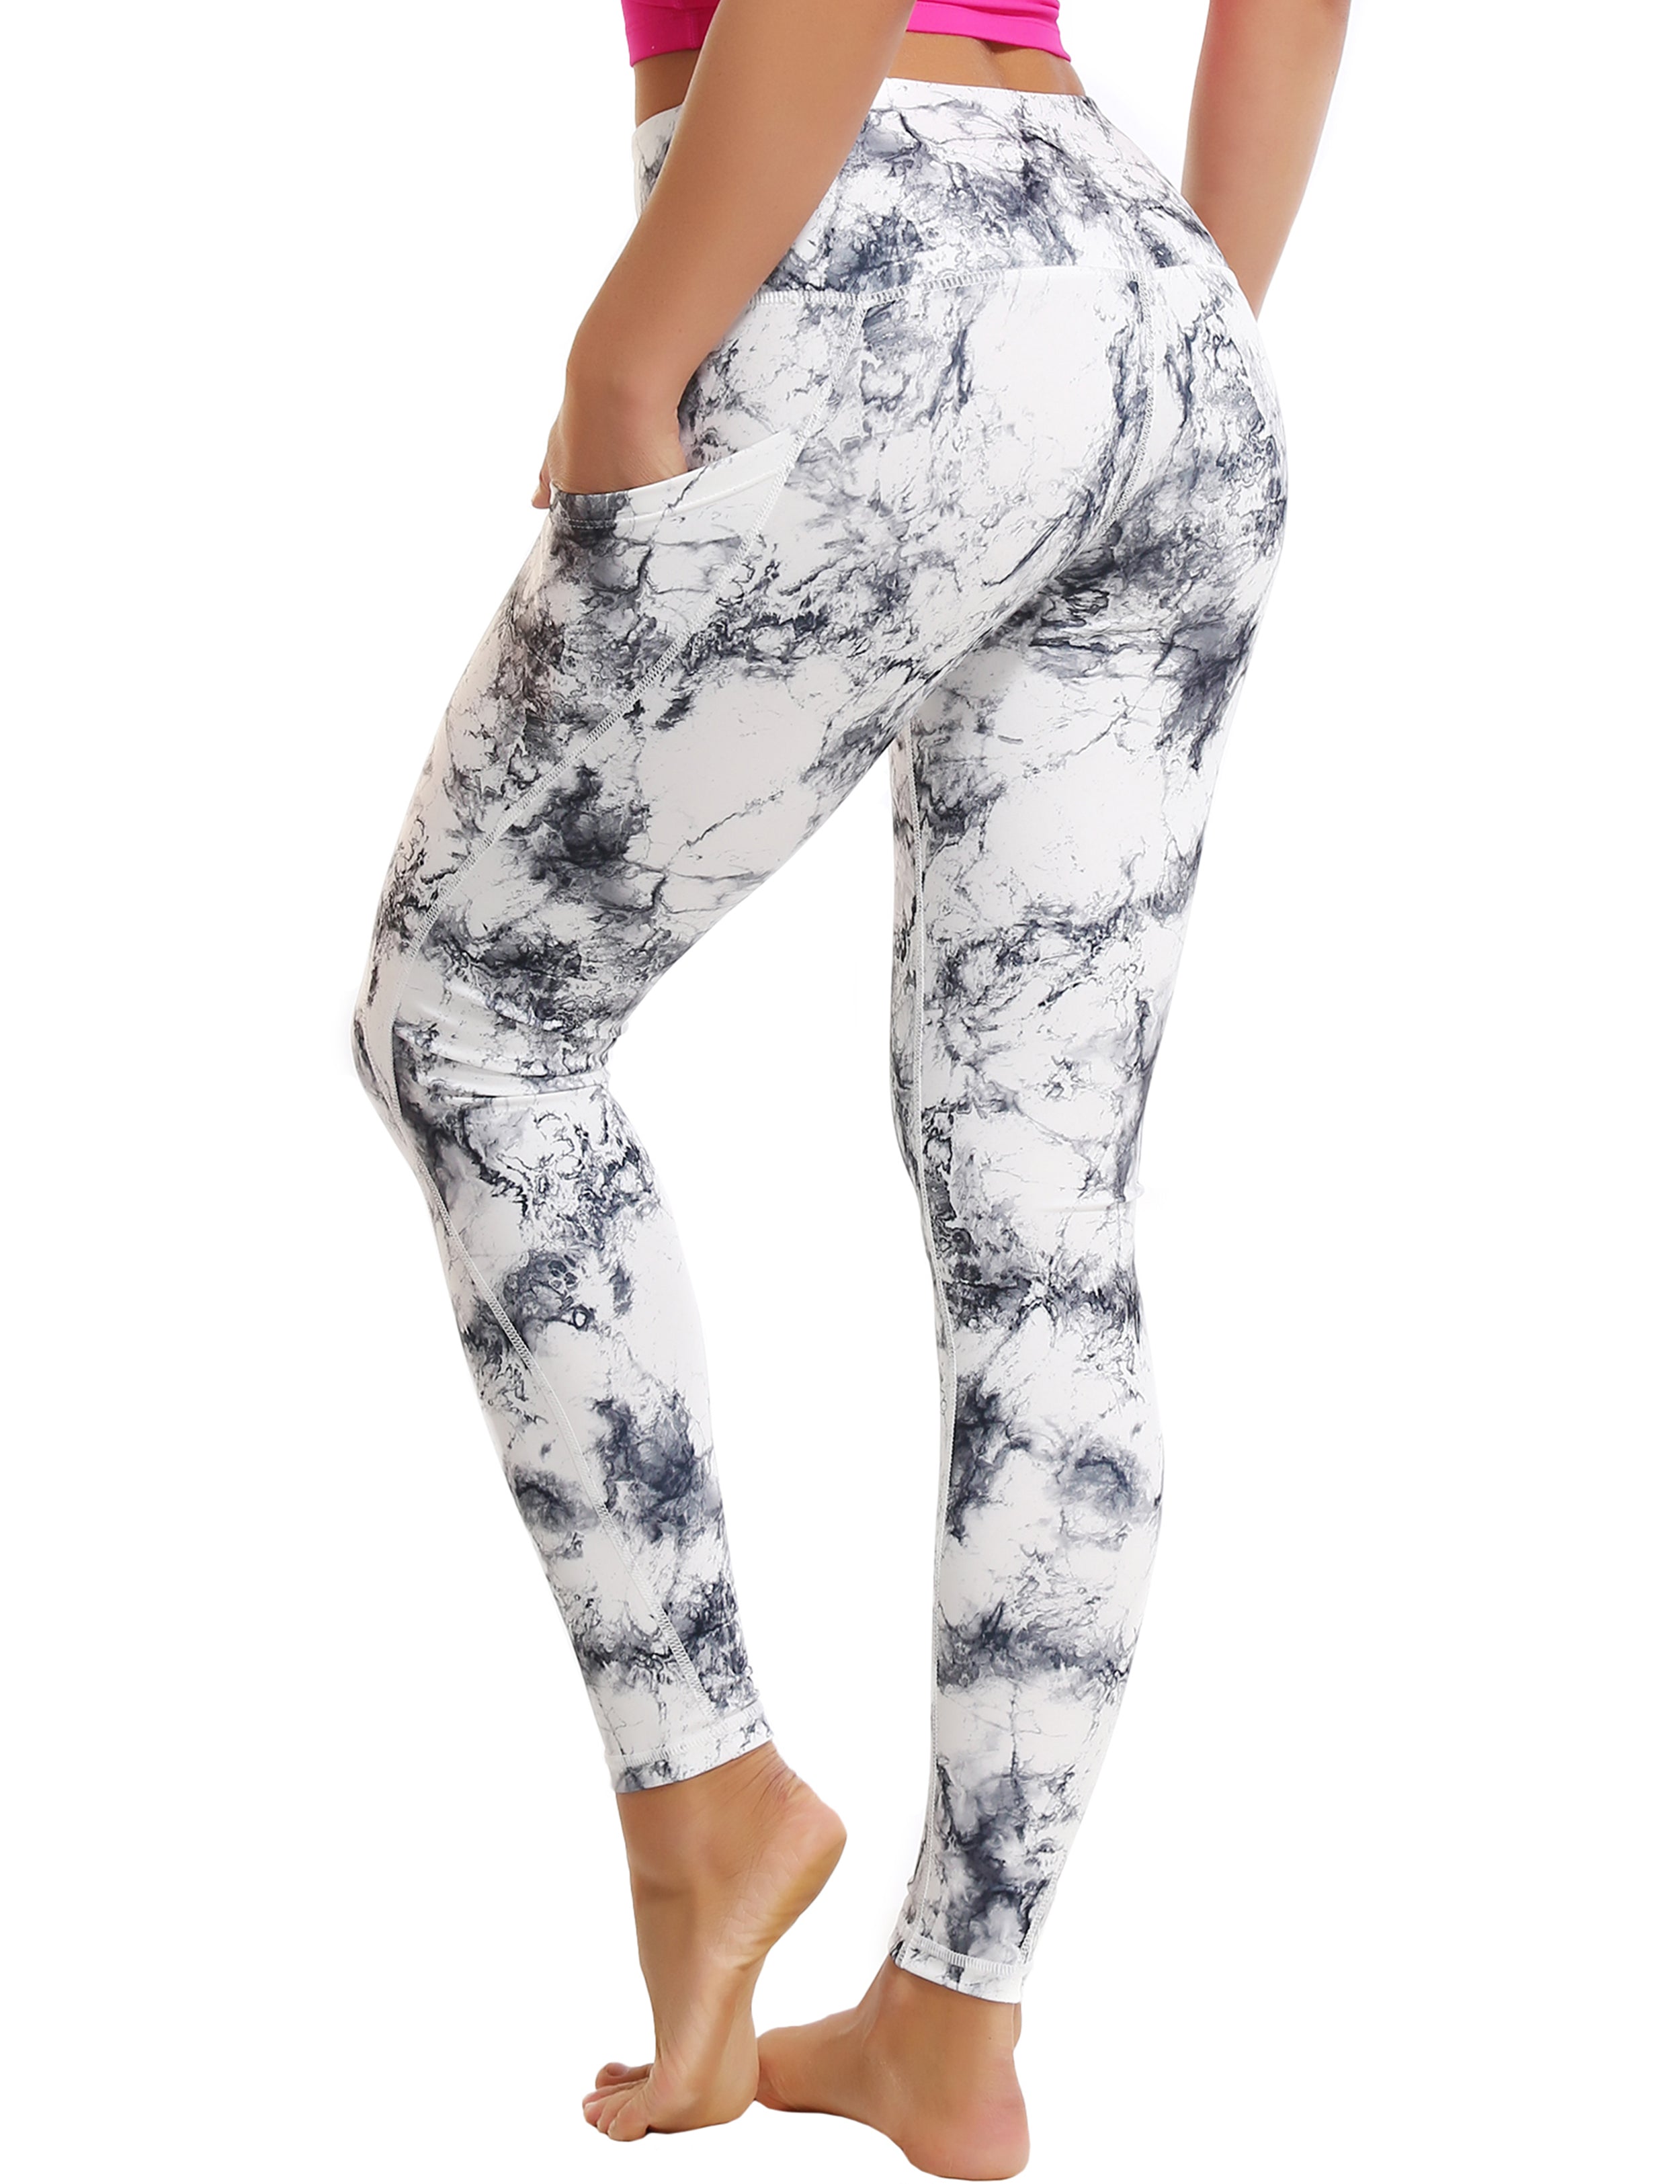 High Waist Side Pockets Pilates Pants arabescato 78%Polyester/22%Spandex Fabric doesn't attract lint easily 4-way stretch No see-through Moisture-wicking Tummy control Inner pocket